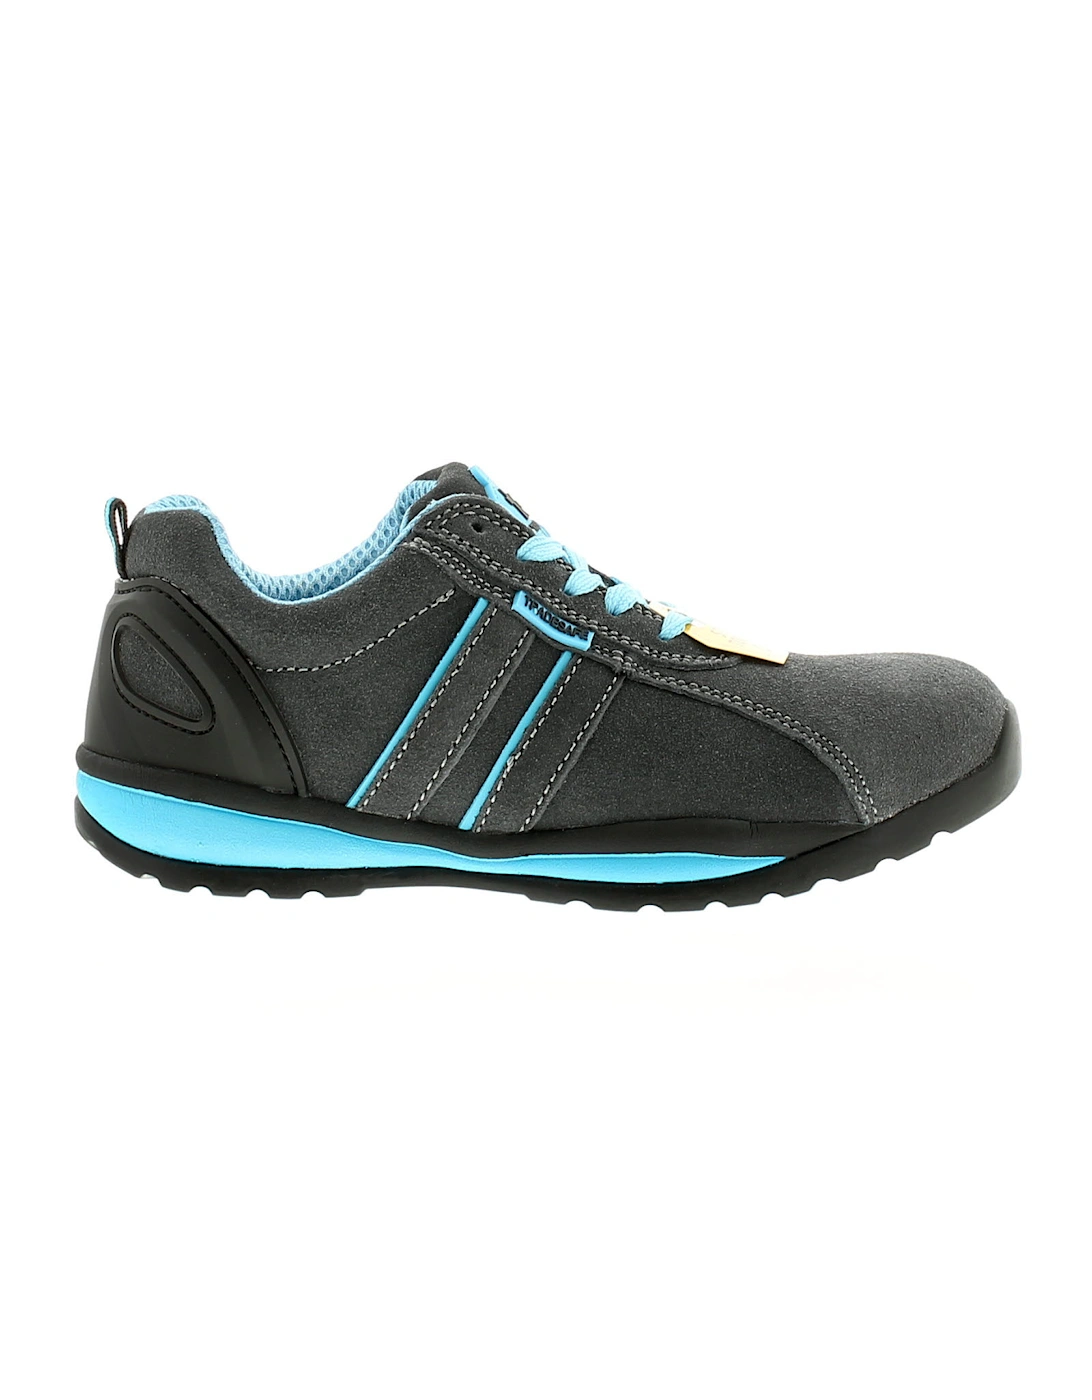 Womens Safety Trainers Barge Leather Lace Up grey blue UK Size